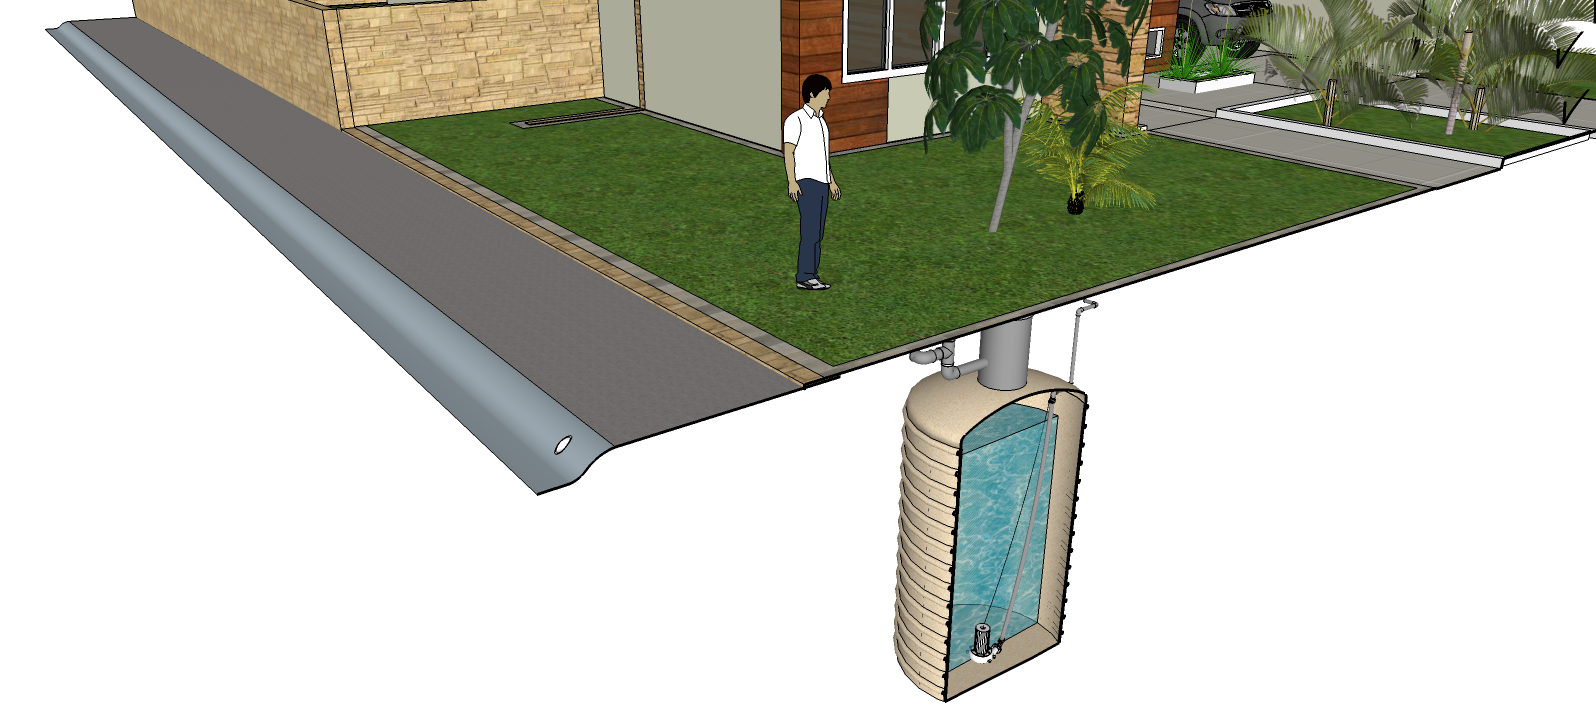 Innovative Residential Rainwater Collection Systems at Your Home